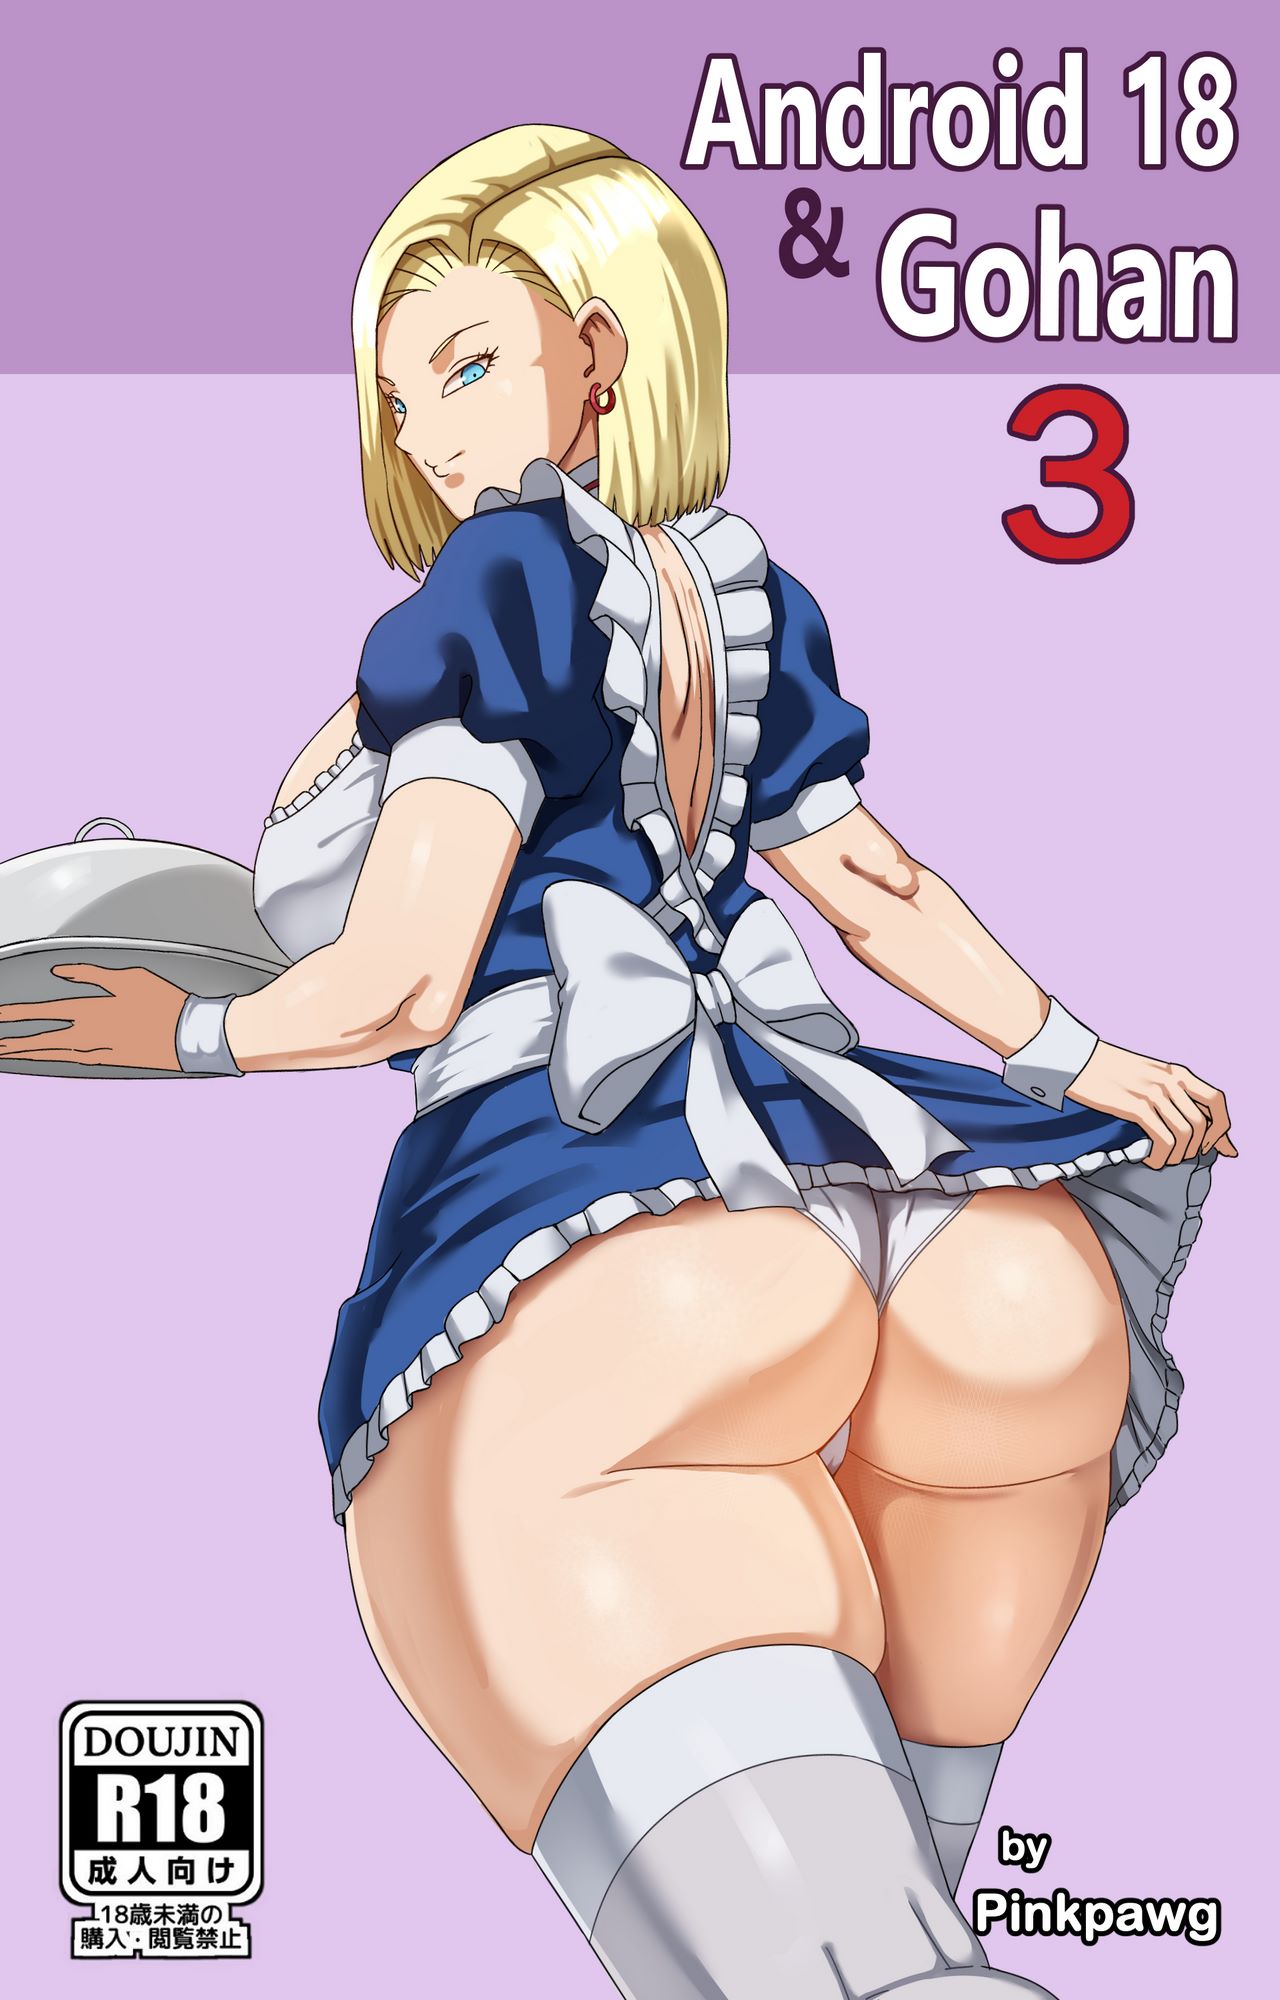 Android 18 Gohan 3 Pink Pawg 1